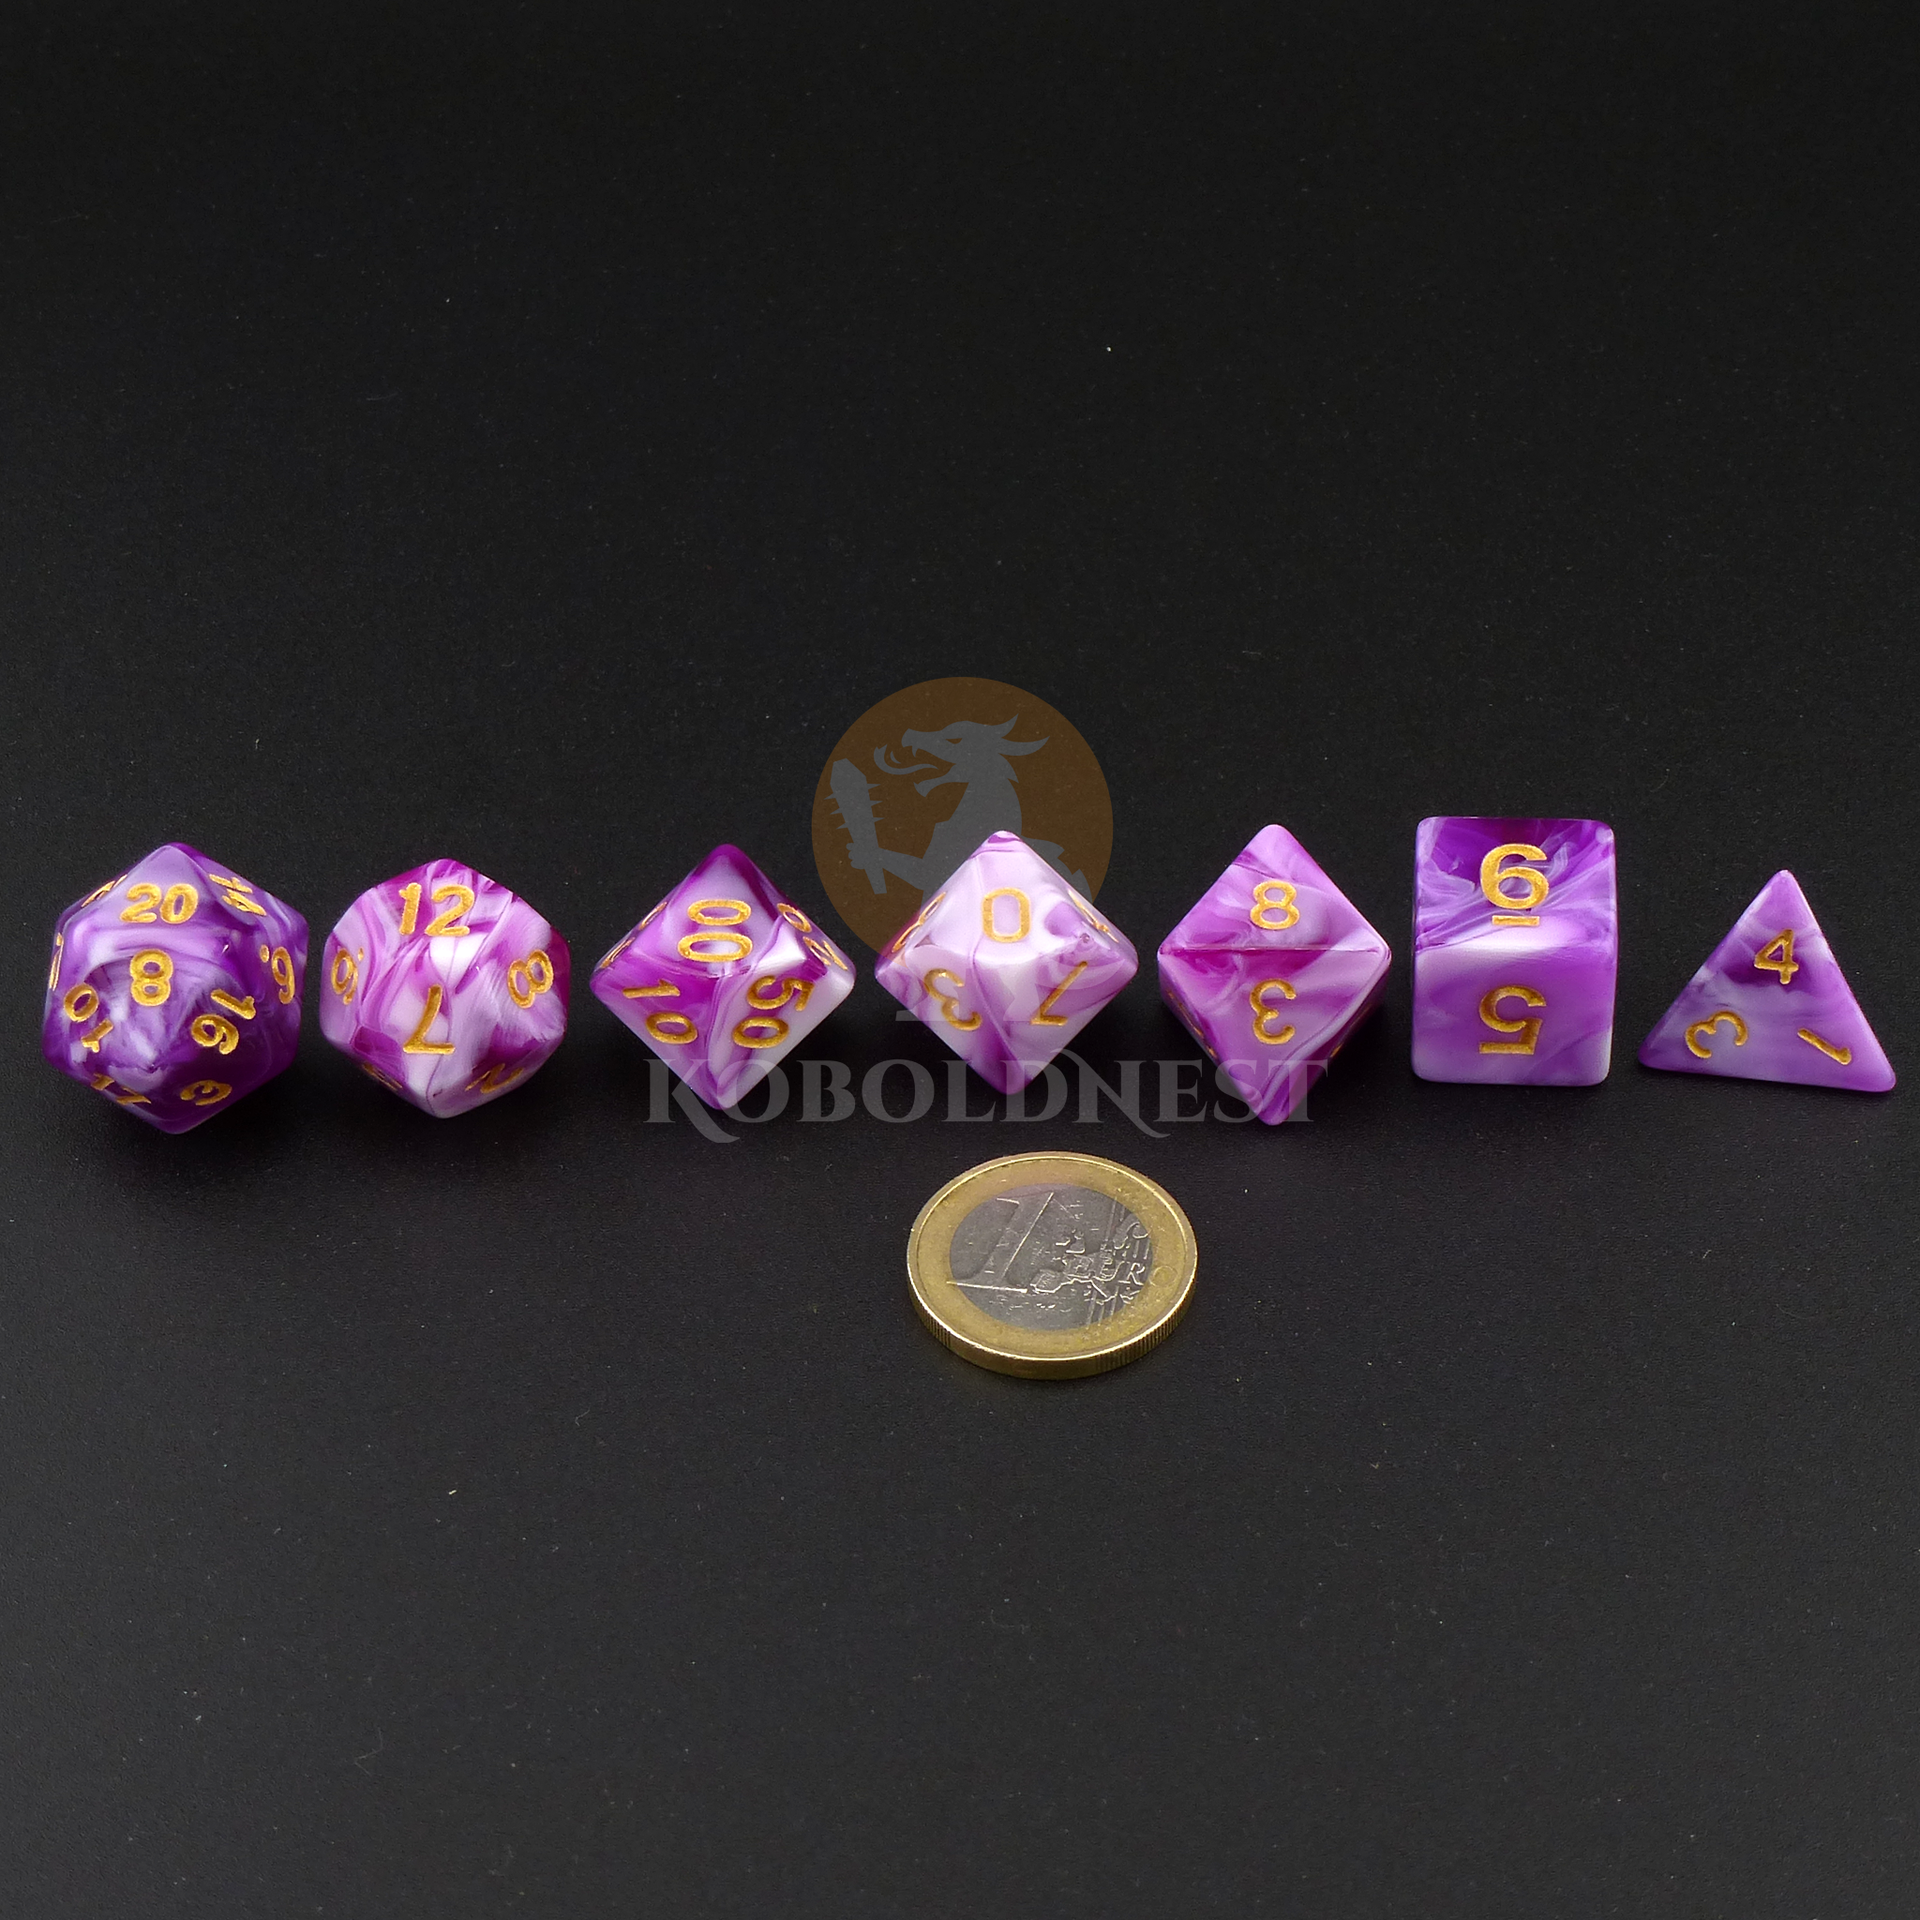 Dice_Polyhedral_Set_Standard_Purple-White_Line_Scale.png